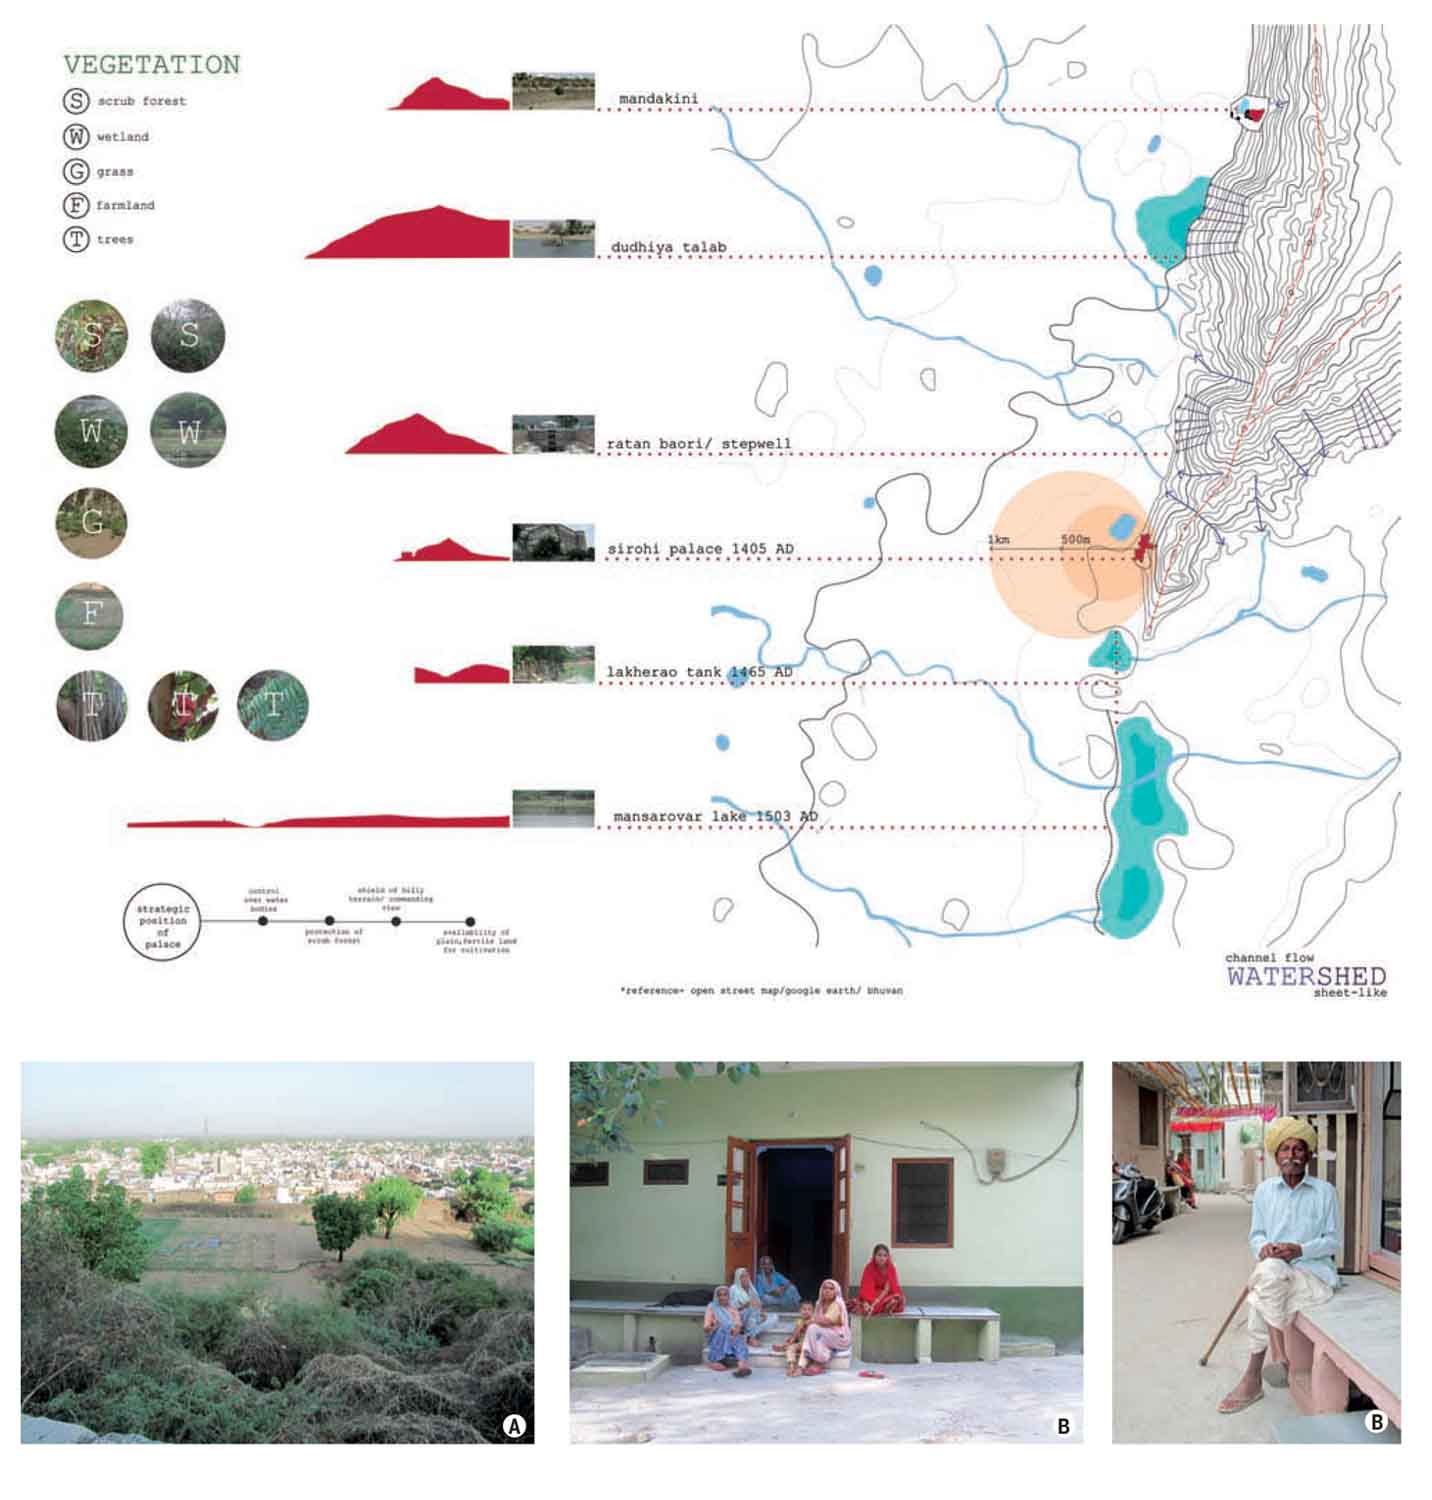 diagnosis-city-watershed-land-contours-allow-water-collect-three-large-catchments-through-sheet-channel-flow-vegetative-buffer-chabutra-stepped-plinth